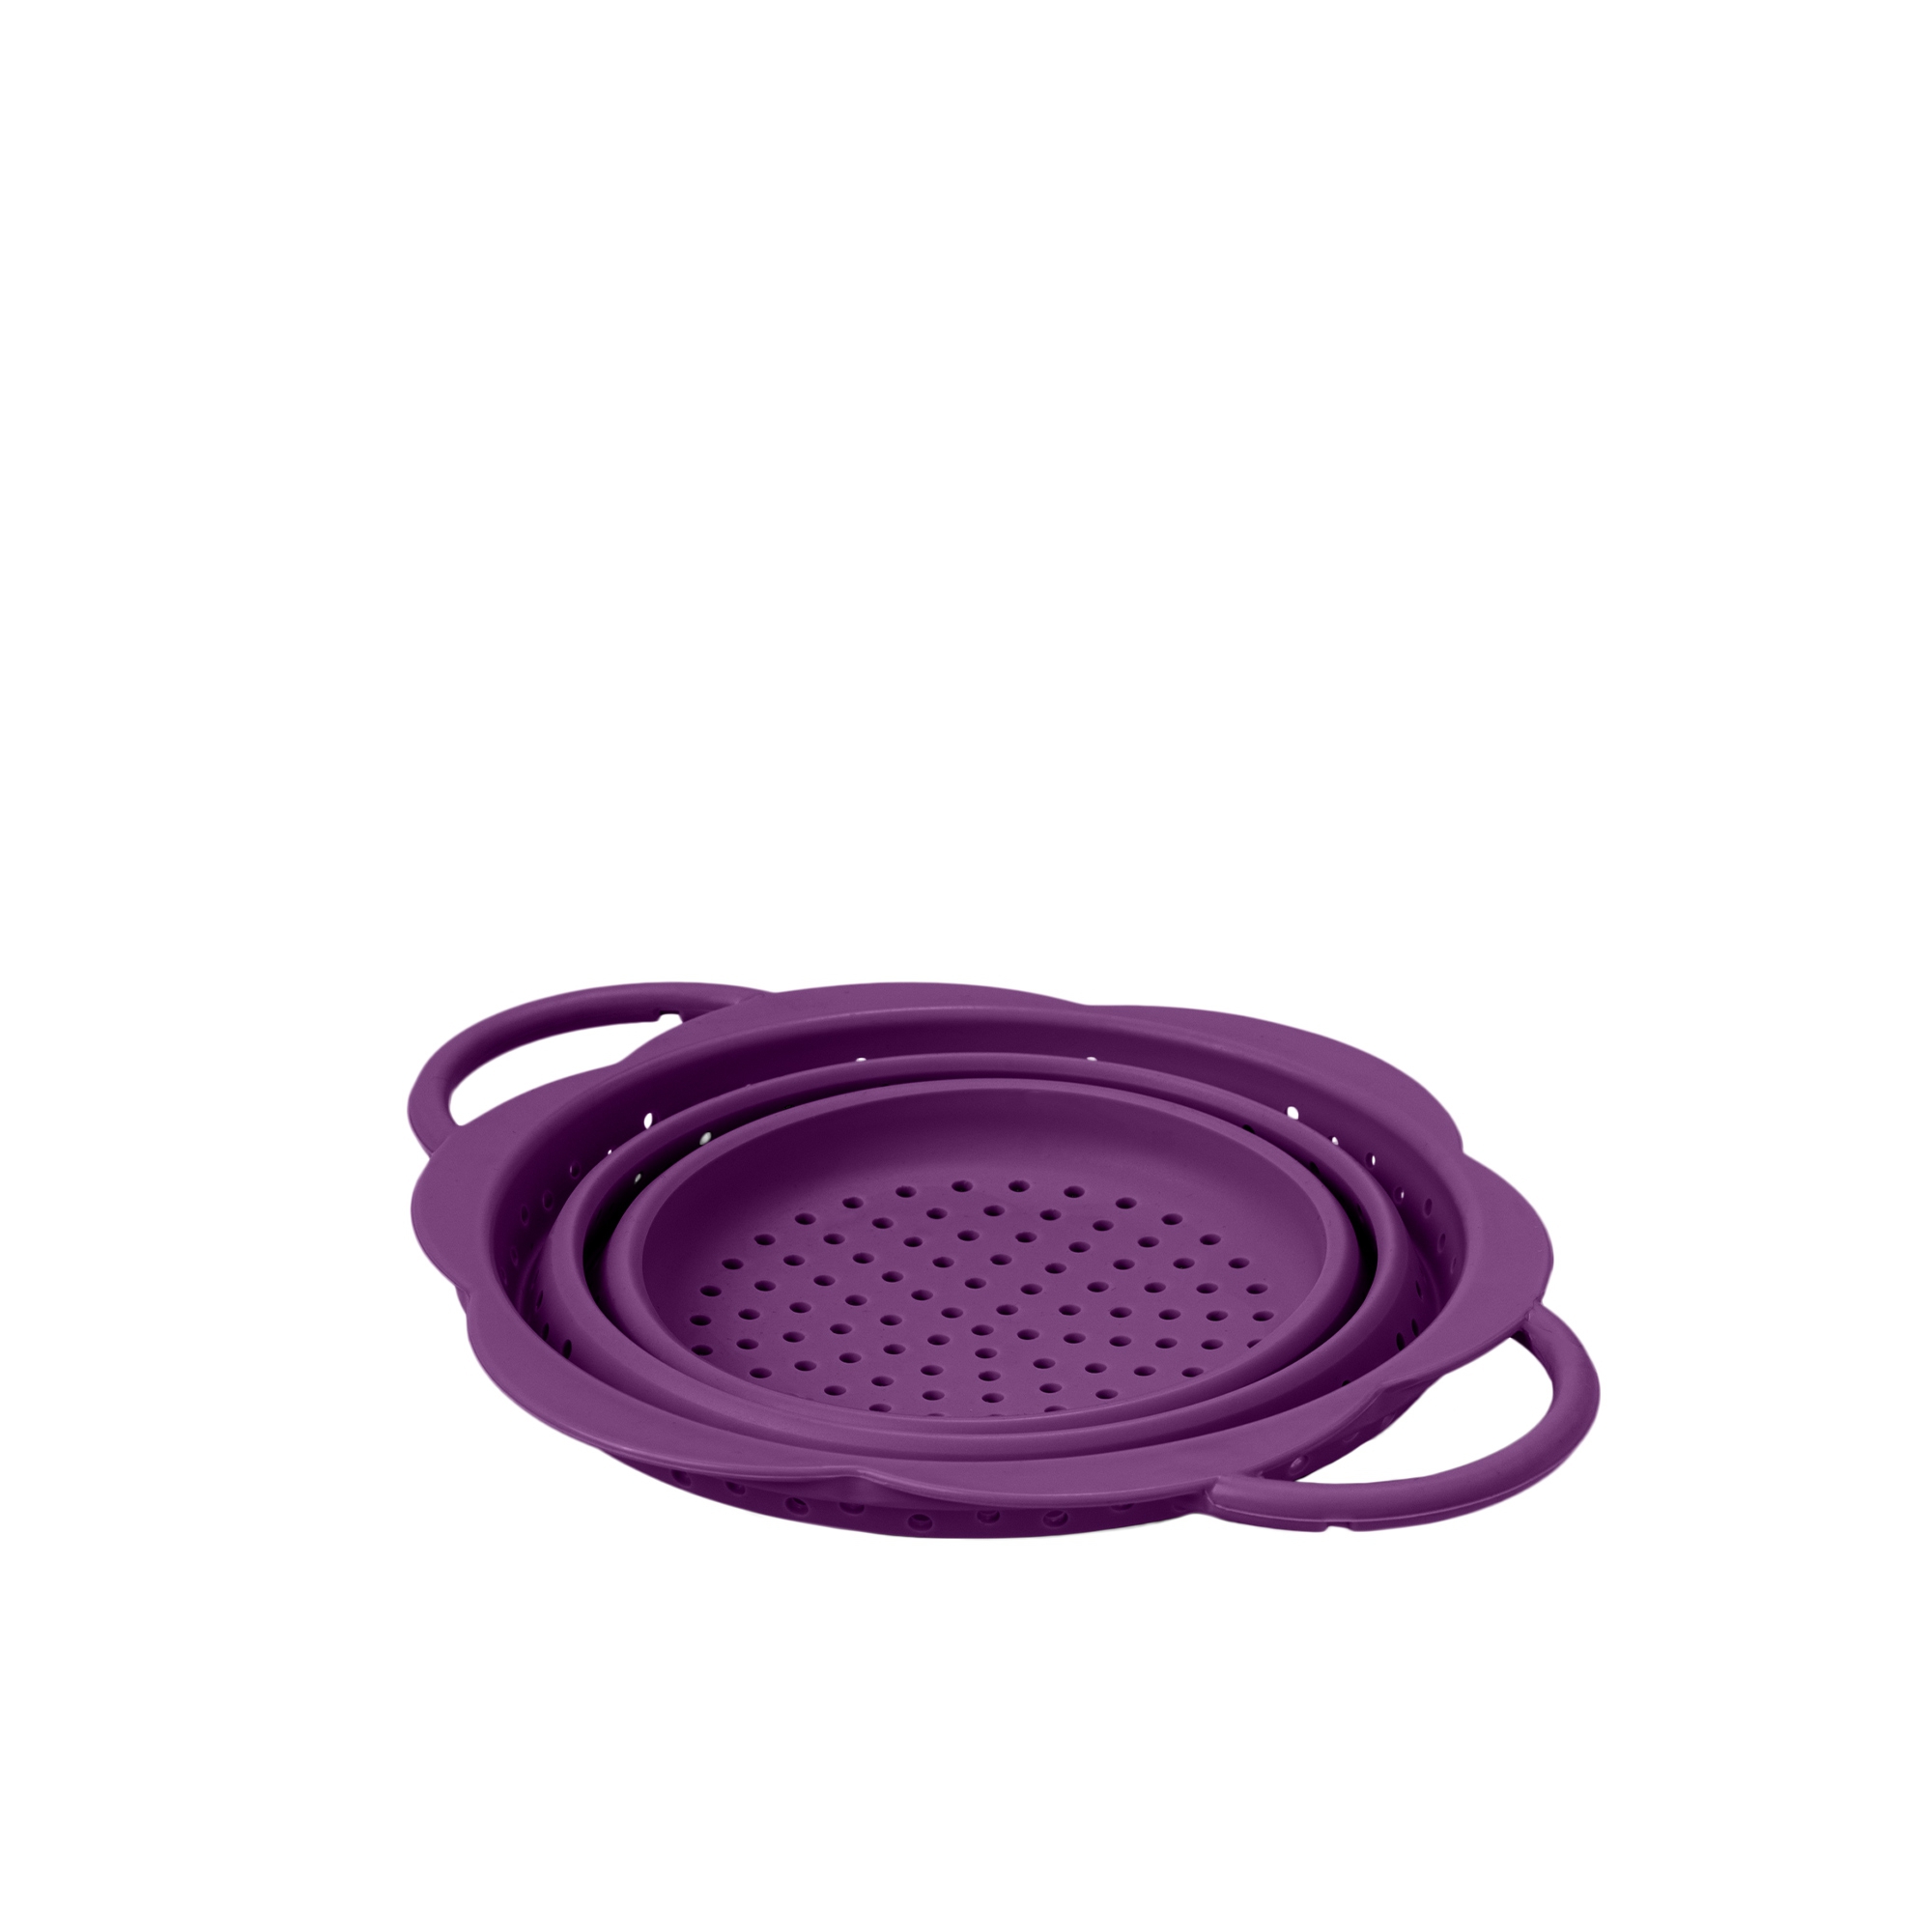  Jello Dessert Mold Tupperware Jel-Ring Serving Mold/purple/desserts  and more/Dish washer safe/BPA FREE / 6 cups: Home & Kitchen